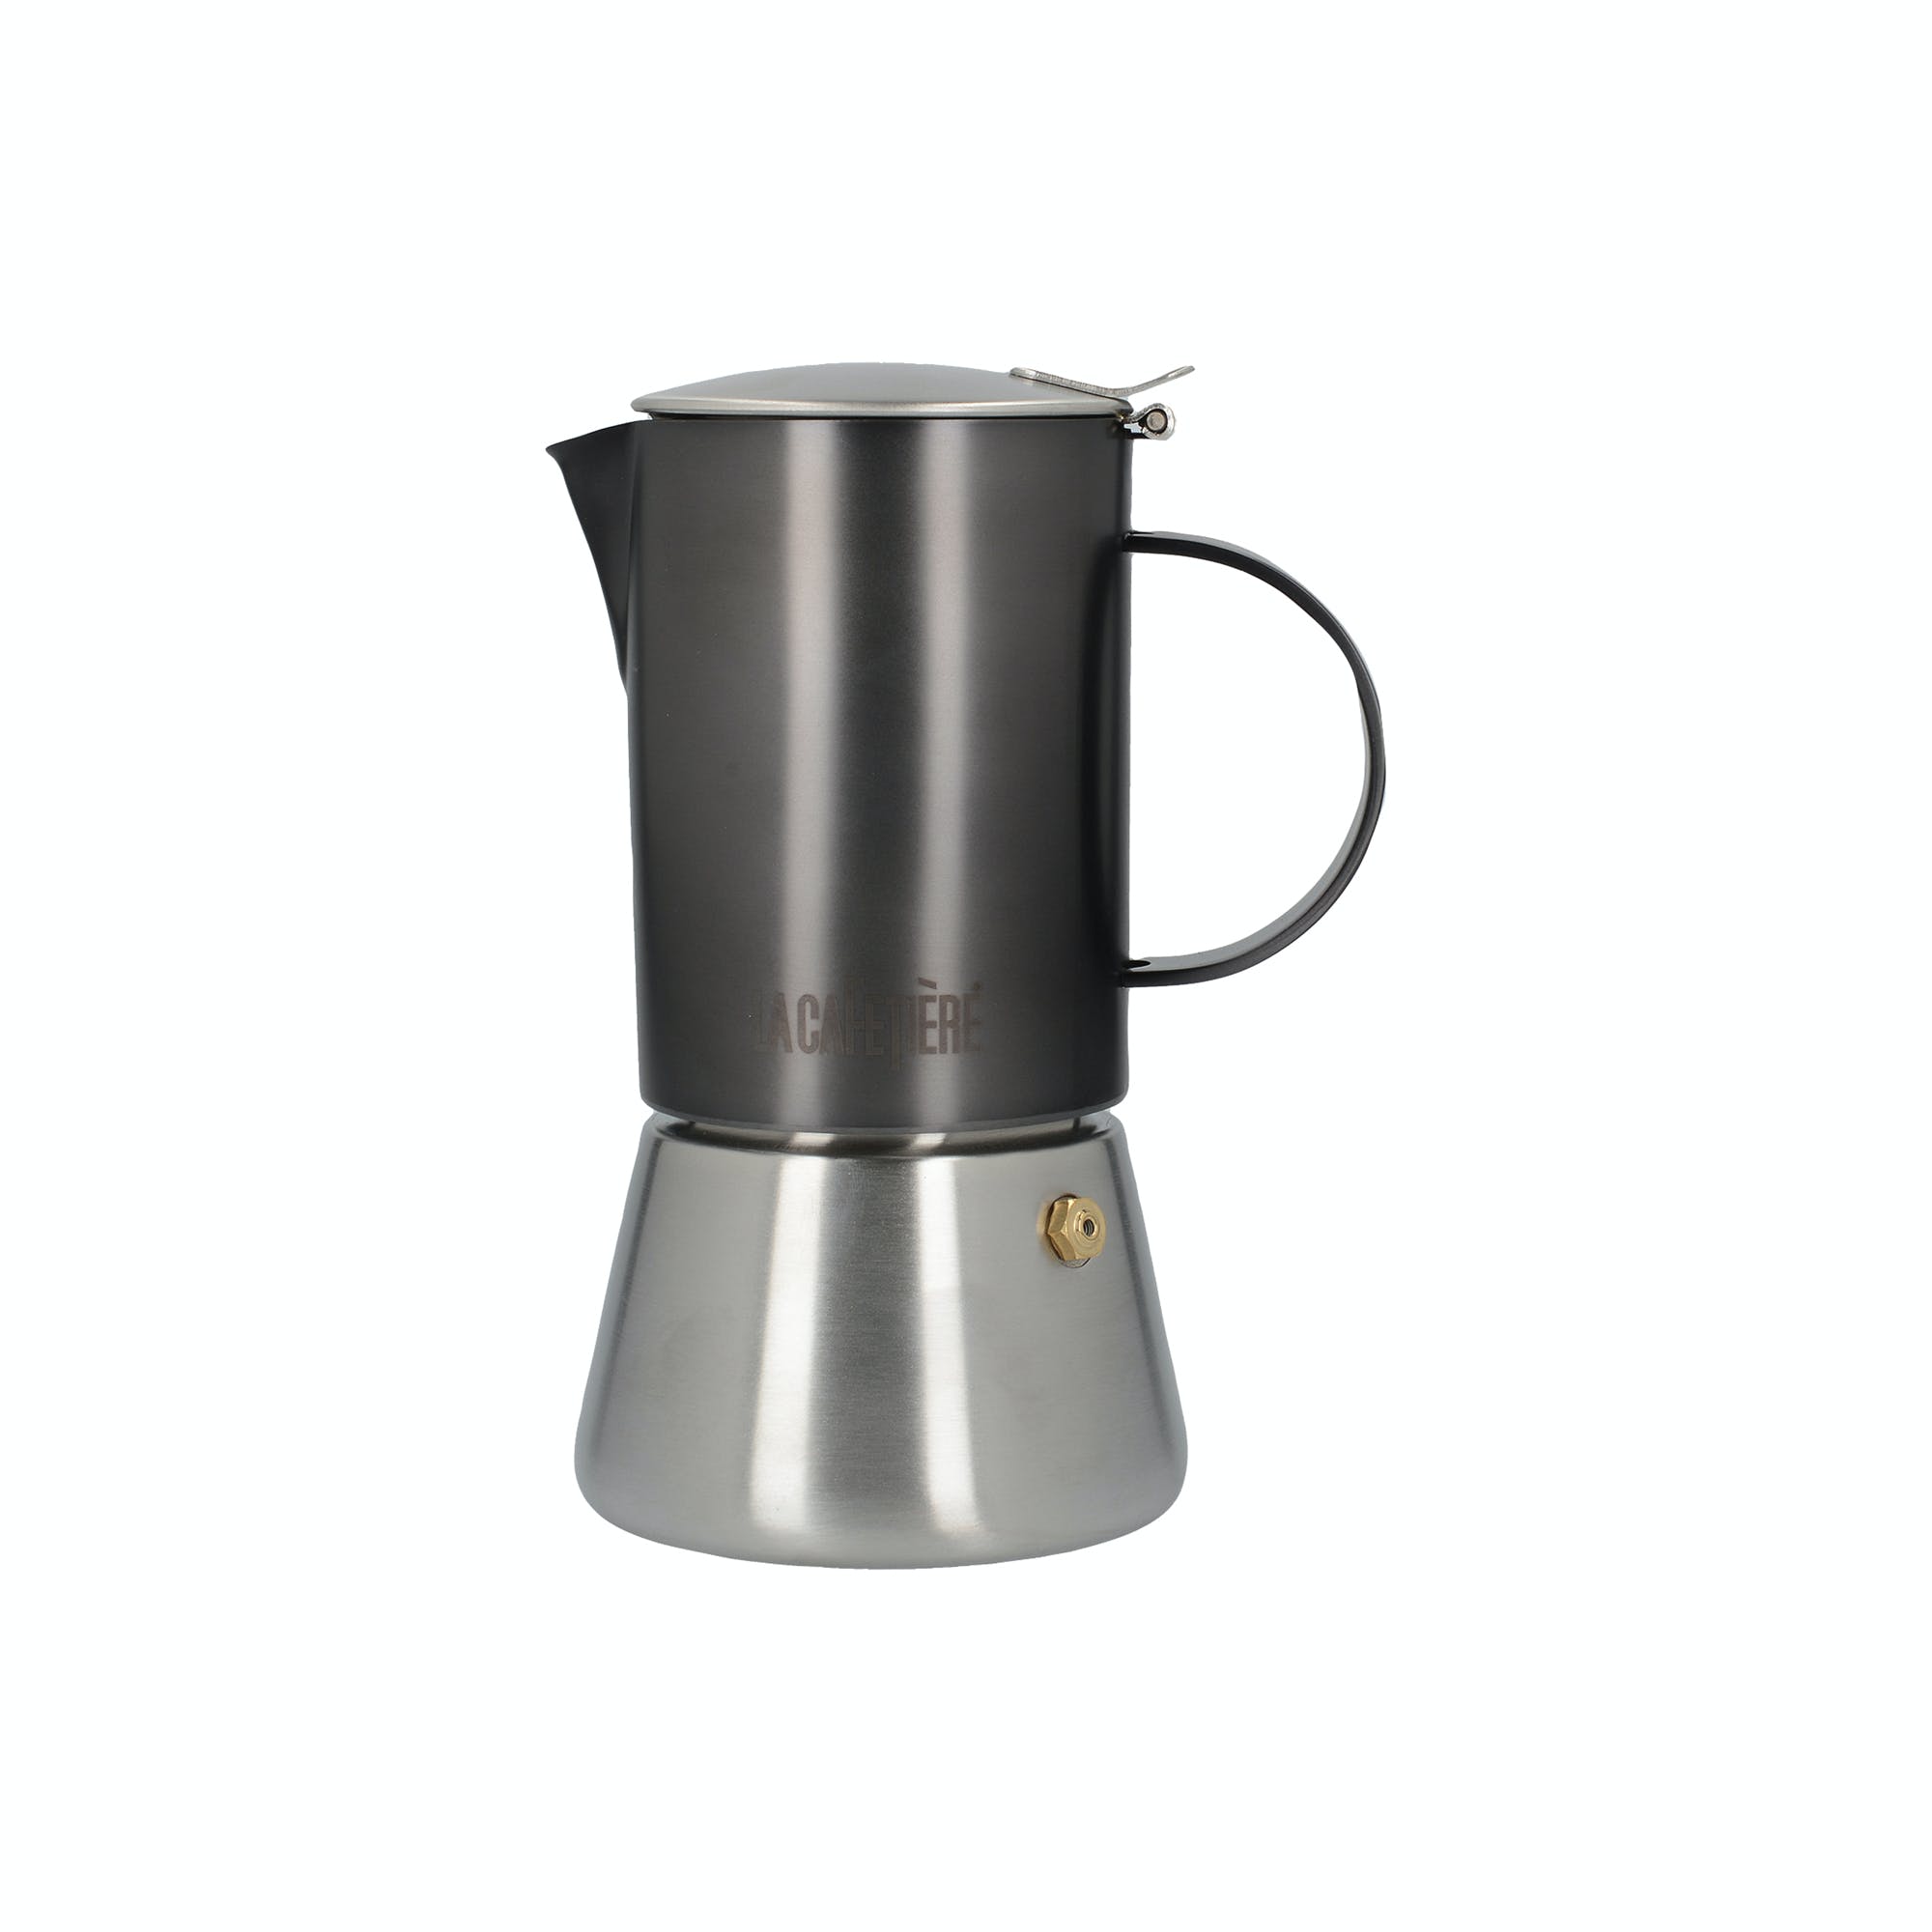 La Cafetiere Edited 4 Cup Stainless Steel Stovetop Gun Metal Grey - The Cooks Cupboard Ltd